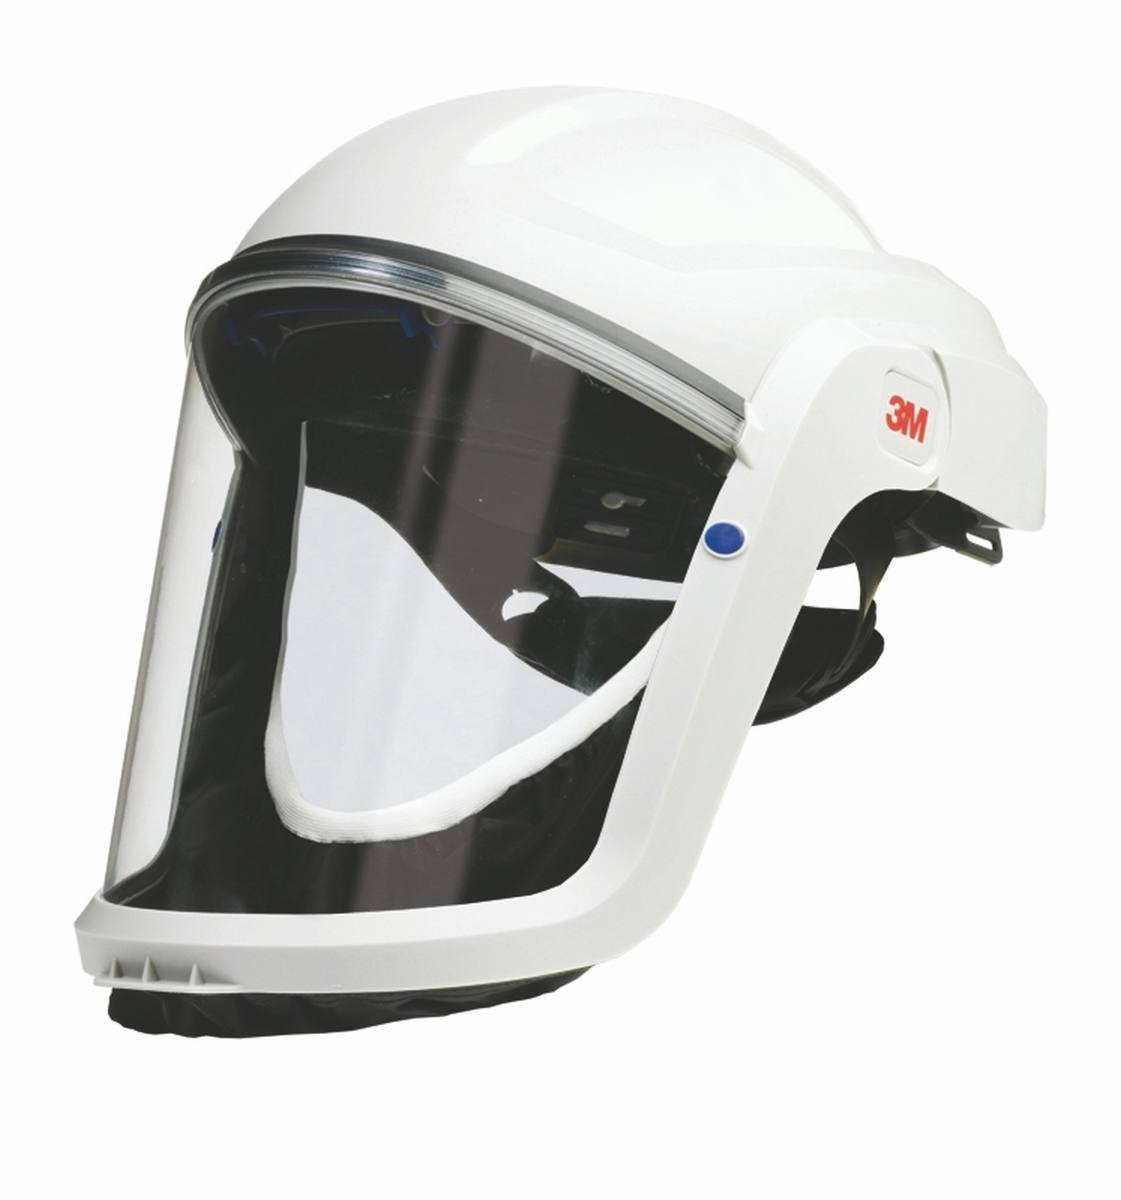 3M Speedglas Versaflo safety helmet M207 with flame-retardant face seal with Adflo blower respirator with QRS air hose, adapter, air flow meter, pre-filter, spark arrester, particle filter, lithium-ion battery and charger #847720